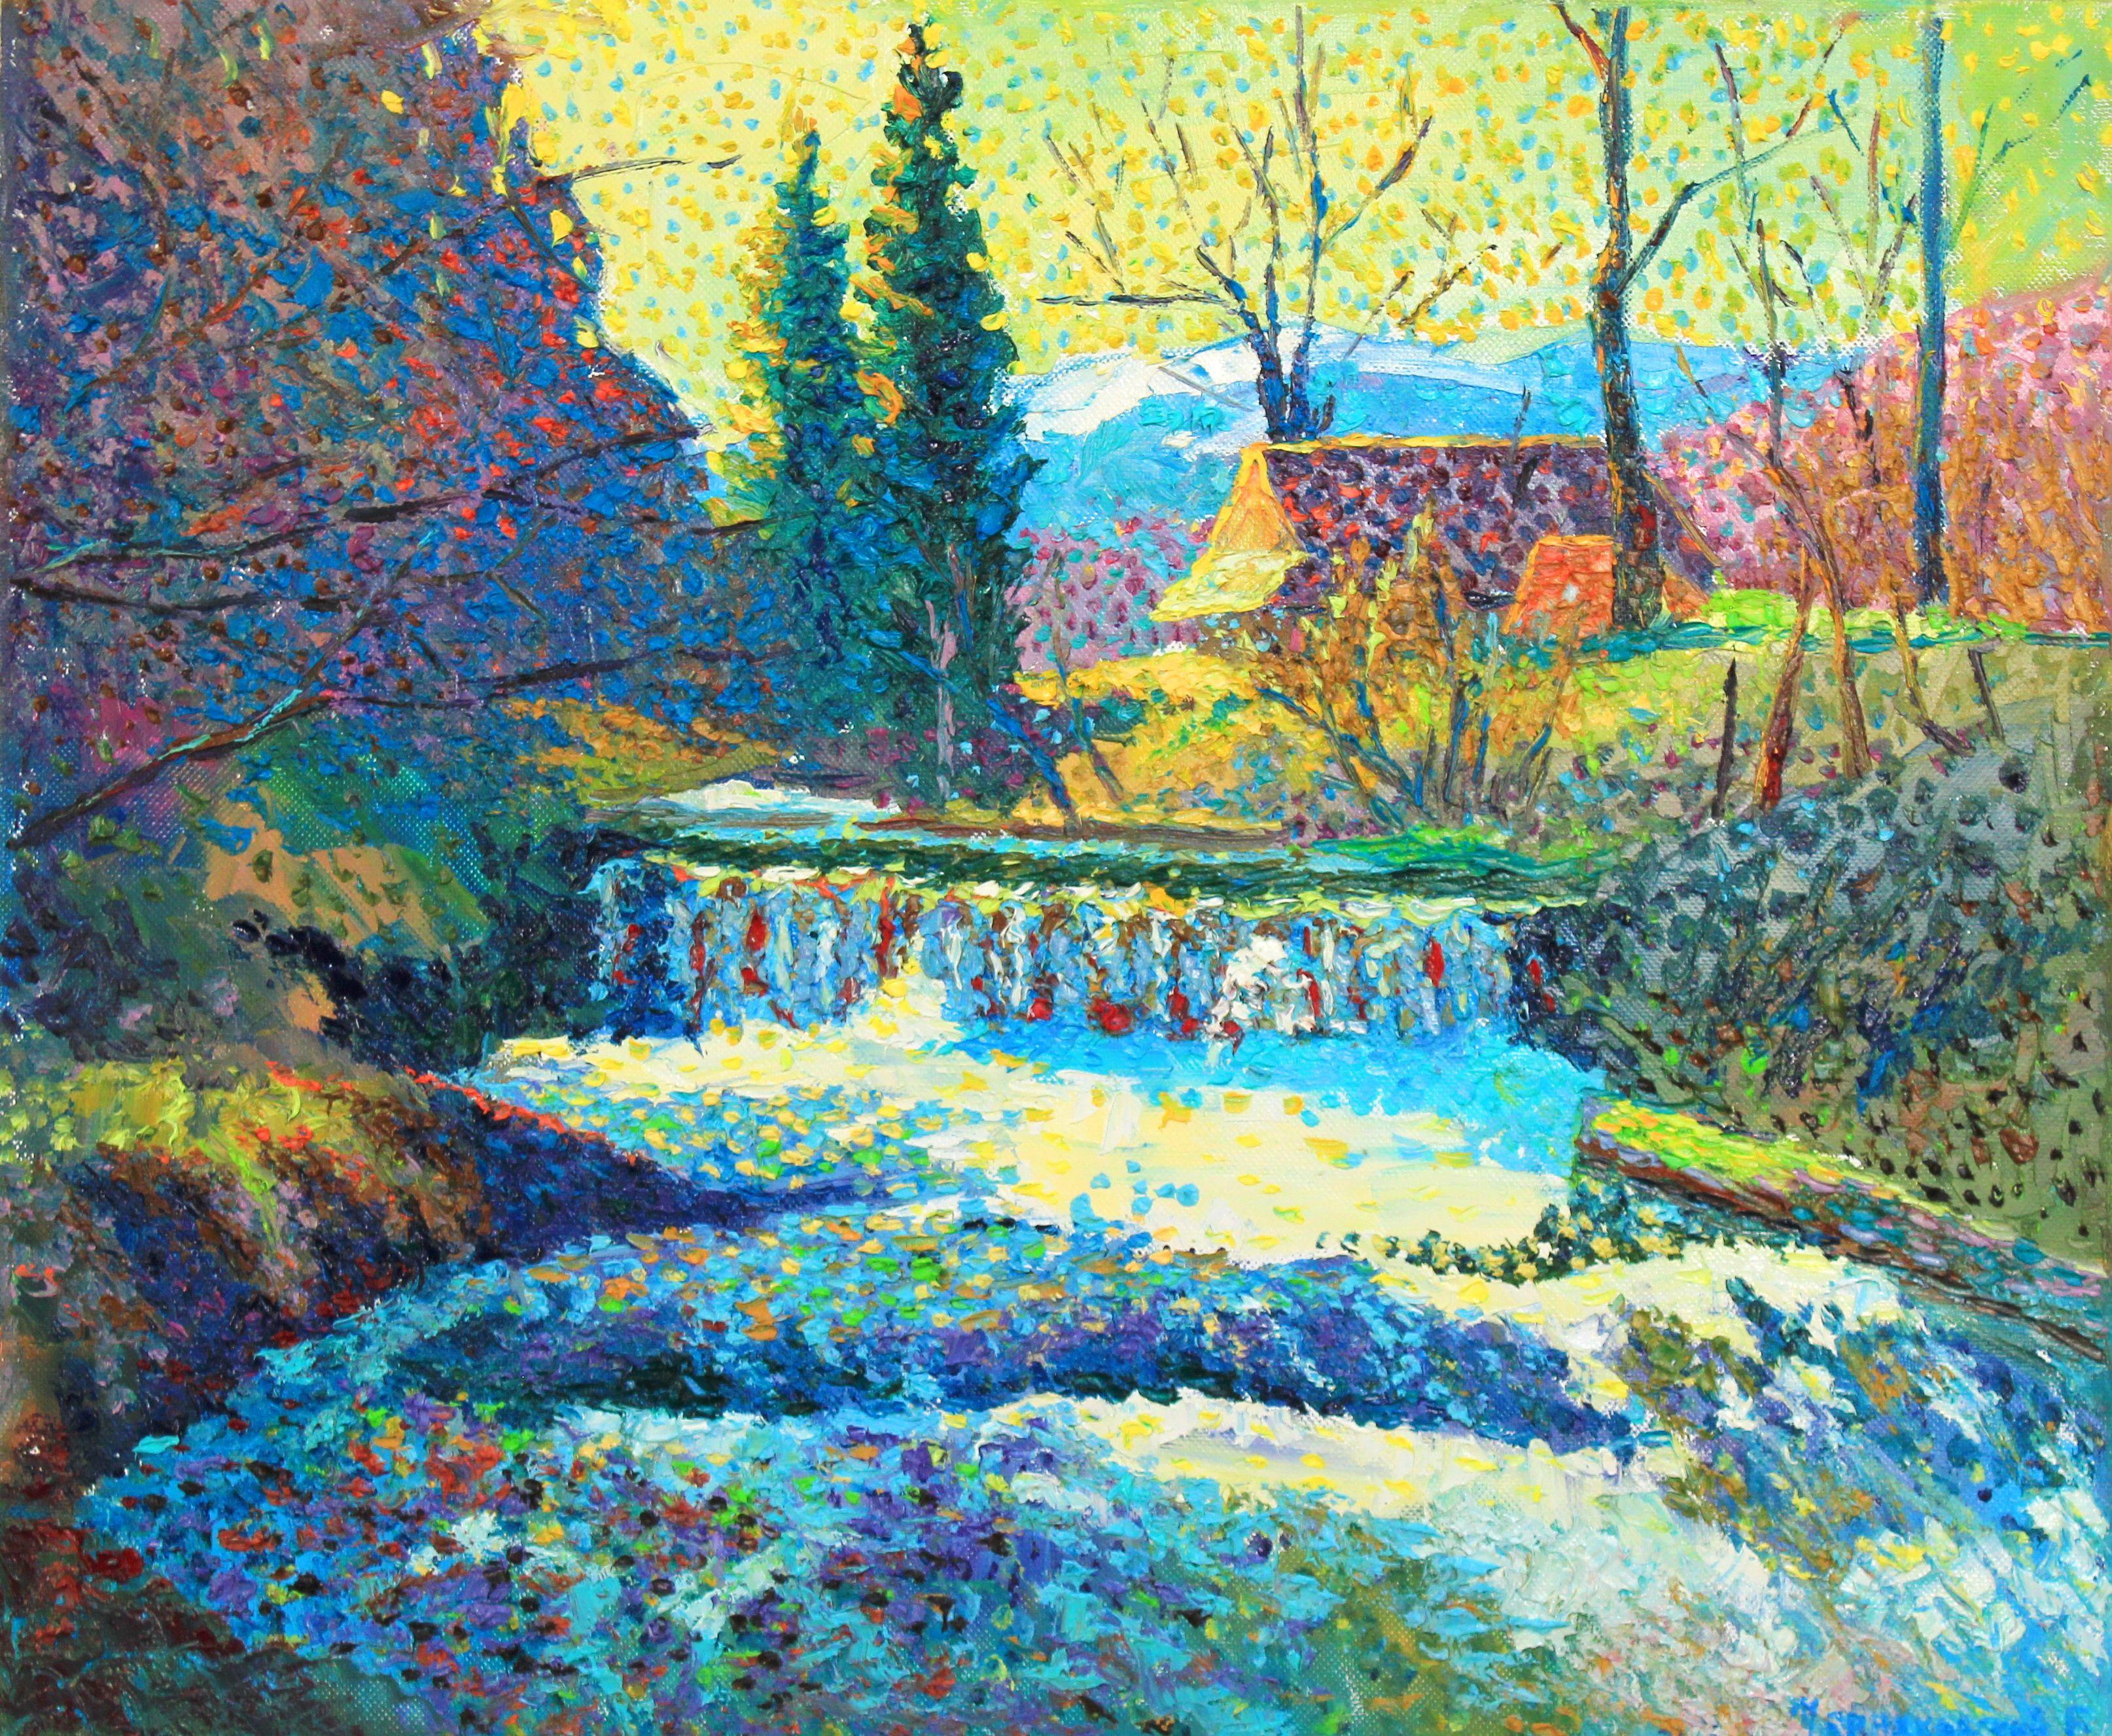 Original Oil painting by Ukrainian artist Evgeny Chernyakovsky    "  River  "  50.0 X 60.0 CM / 19.6 X 23.6 IN  HIGH QUALITY oil on canvas  Signed on the front and back  Dated 2020  Good condition  GUARANTEE OF AUTHENTICITY :: Painting ::